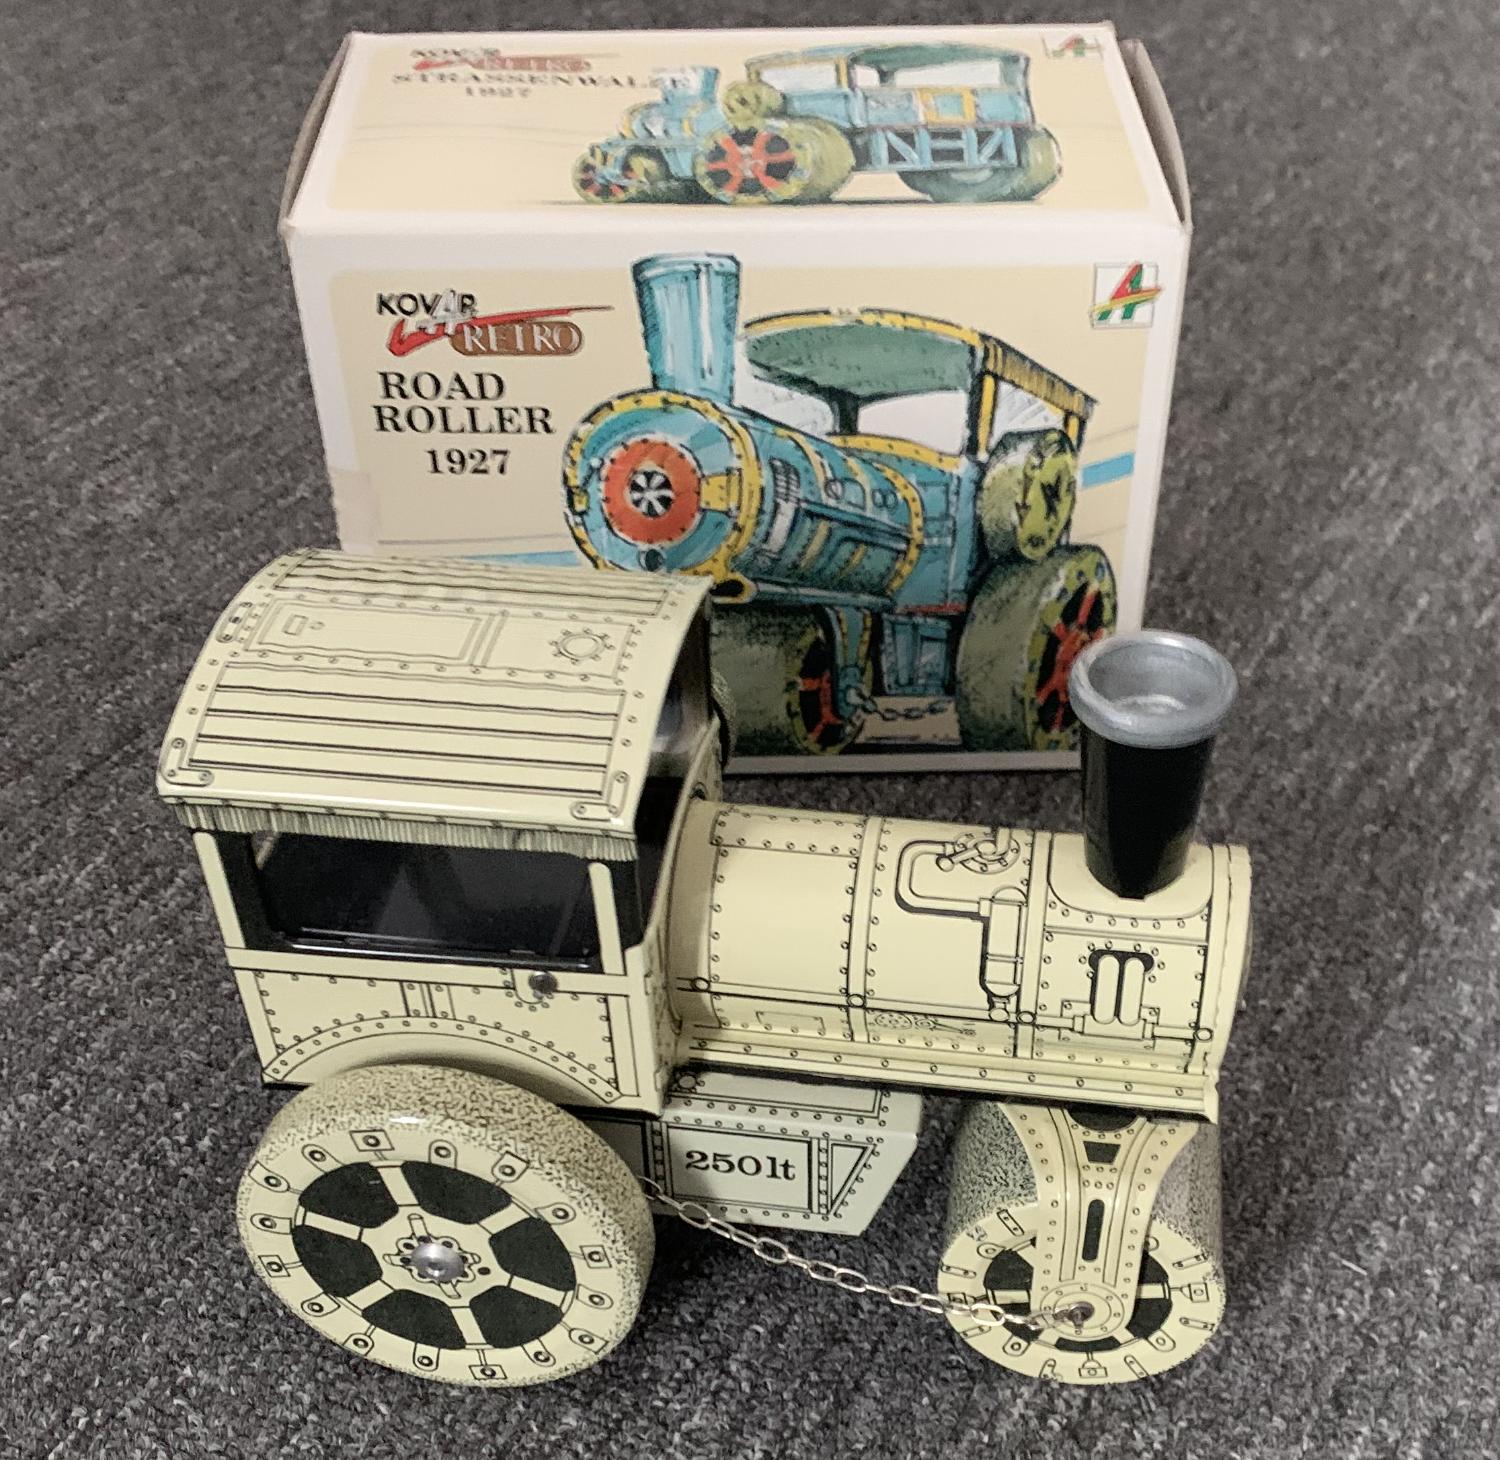 This tinplate clockwork Road Roller is in excellent condition and comes with the key, when wound the Roller moves backwards and forwards. It is supplied in the original box which is in good condition.